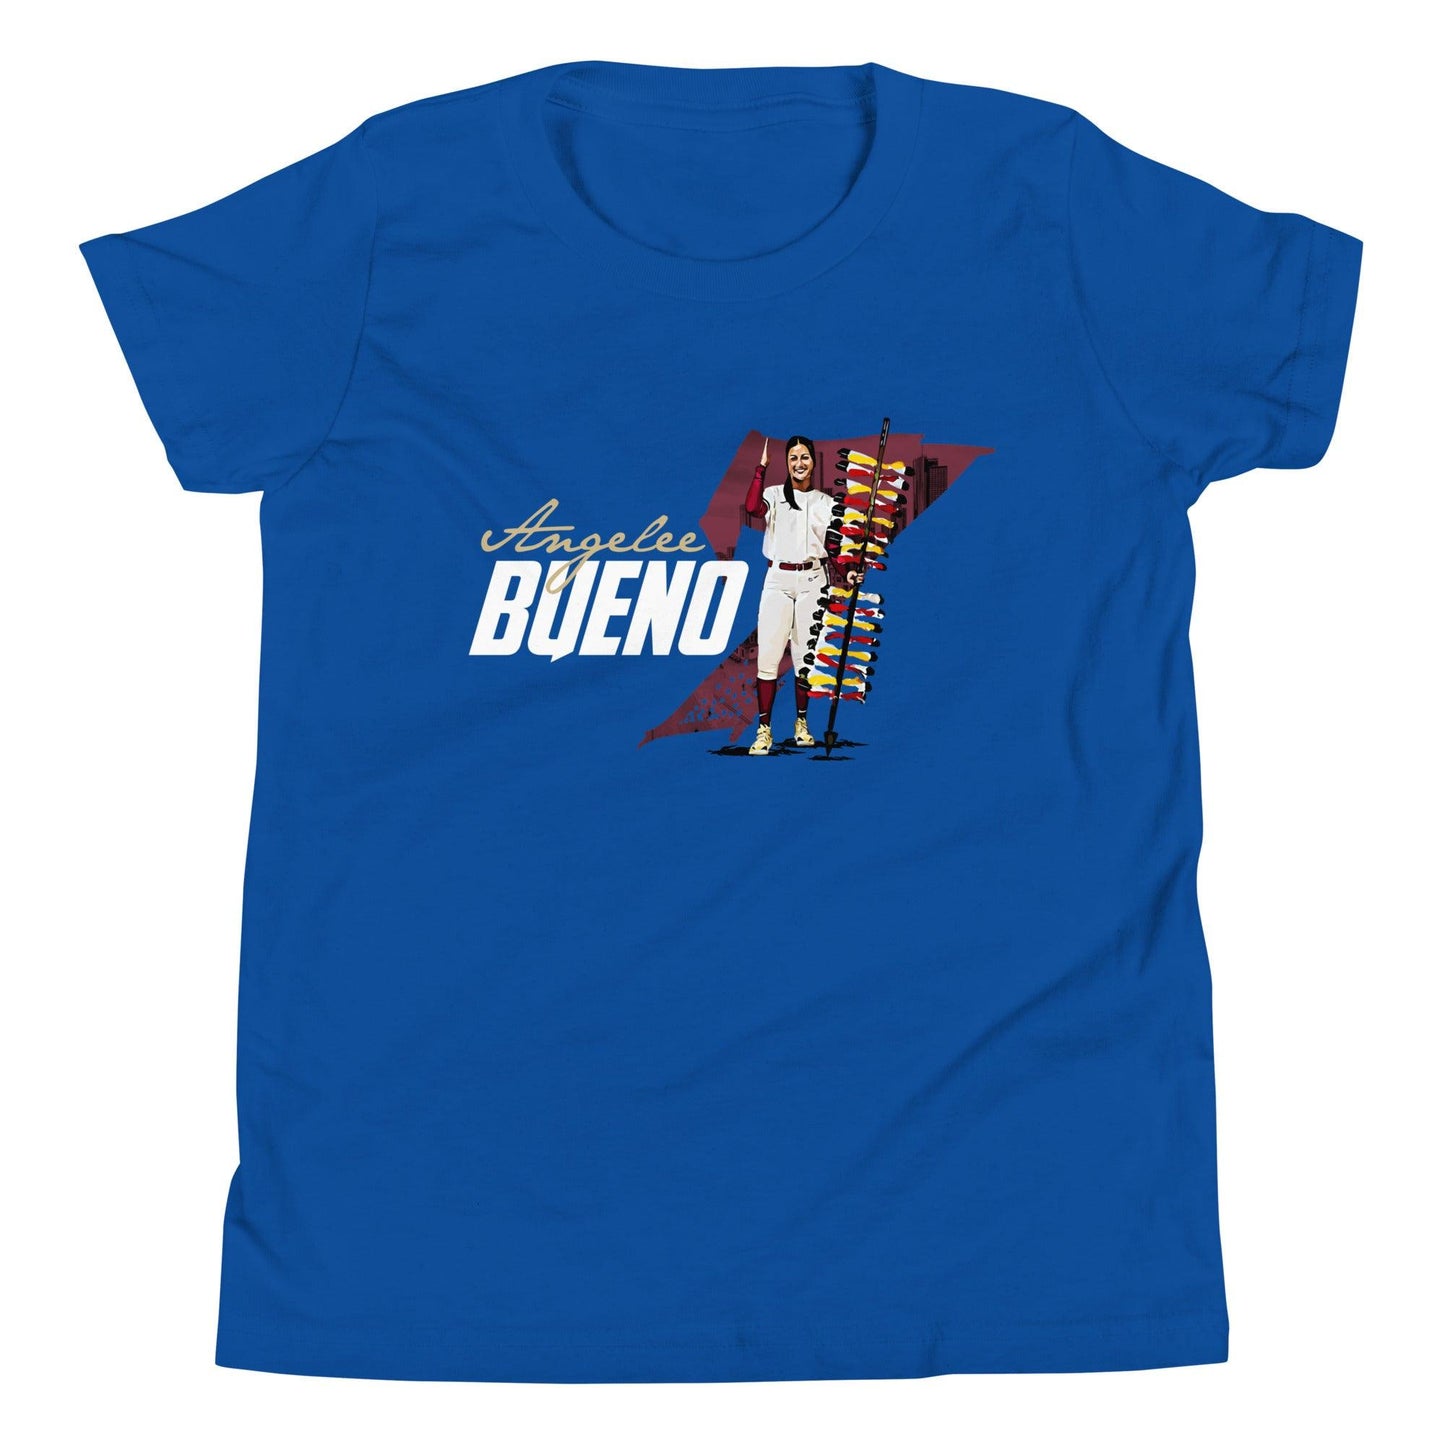 Angelee Bueno "Gameday" Youth T-Shirt - Fan Arch